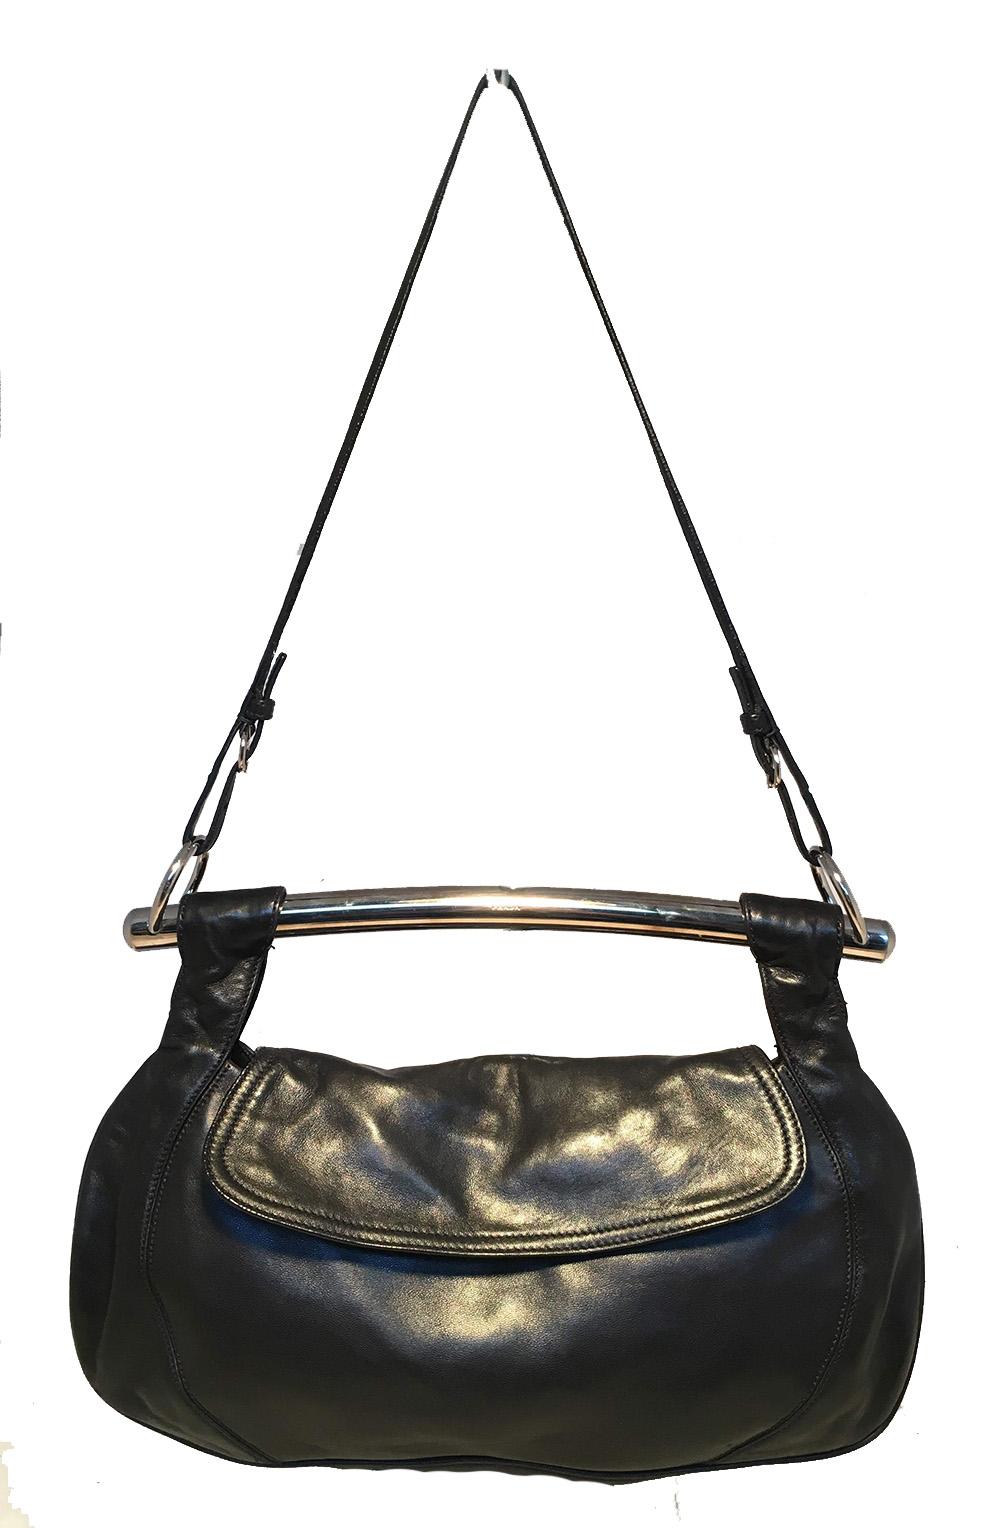 Prada Black Leather Bar Top Handle Convertible Handbag in very good condition. Soft black calfskin leather exterior trimmed with silver hardware and signature enamel logo plate on back side. Top Silver bar handle and attached thin black leather